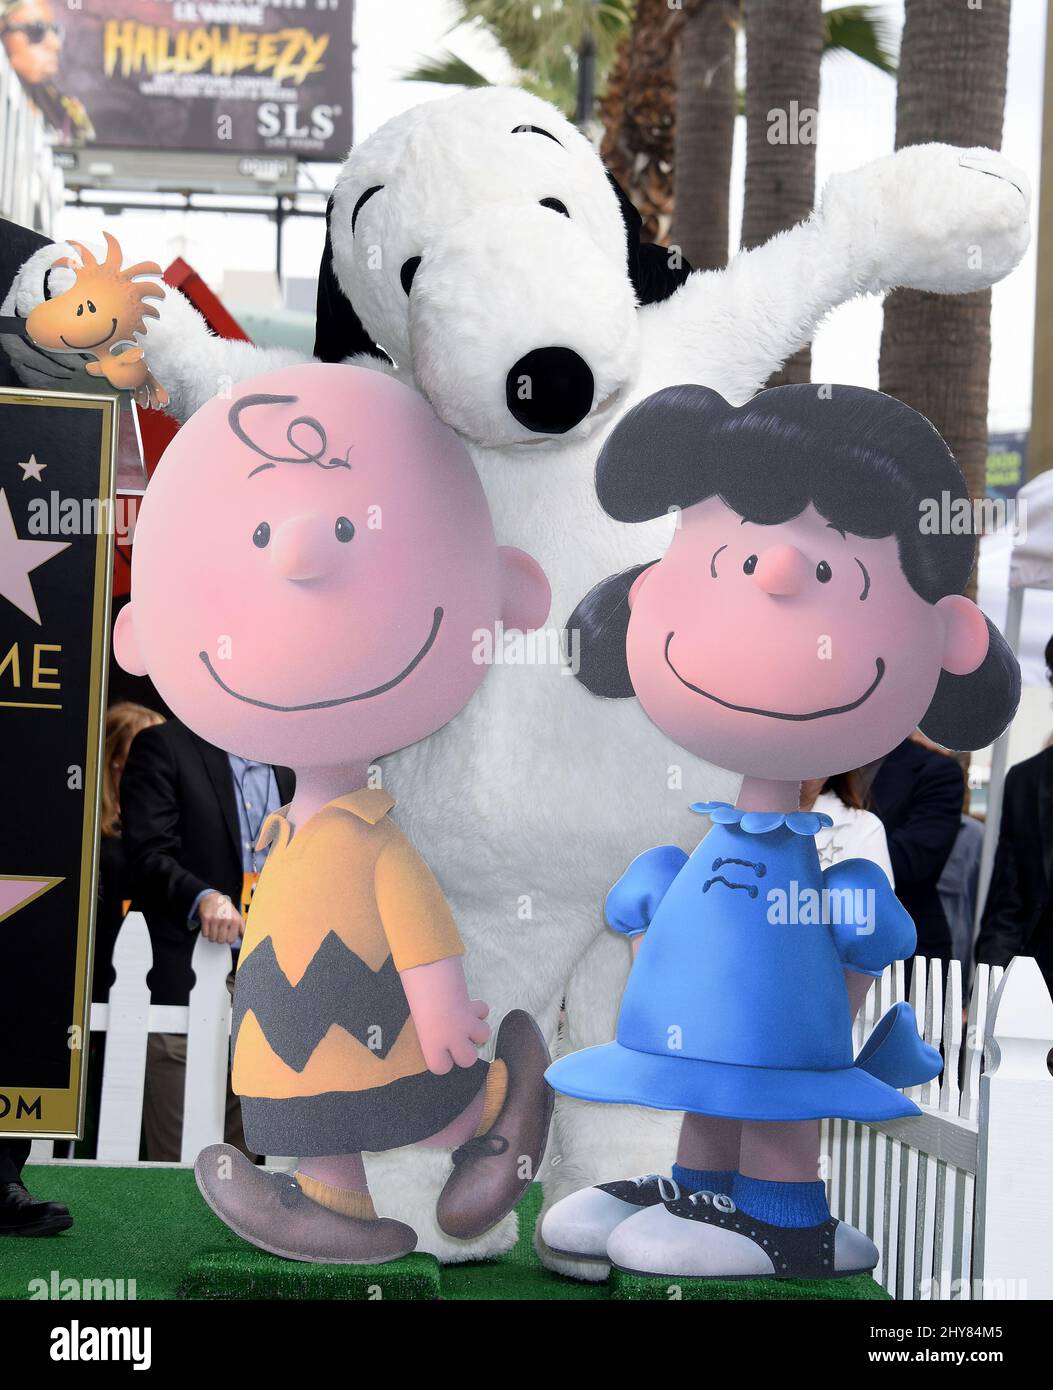 Snoopy Snoopy Hollywood Walk of Fame Star Ceremony. His star was placed next to his creator Charles M. Schulz' star. Stock Photo